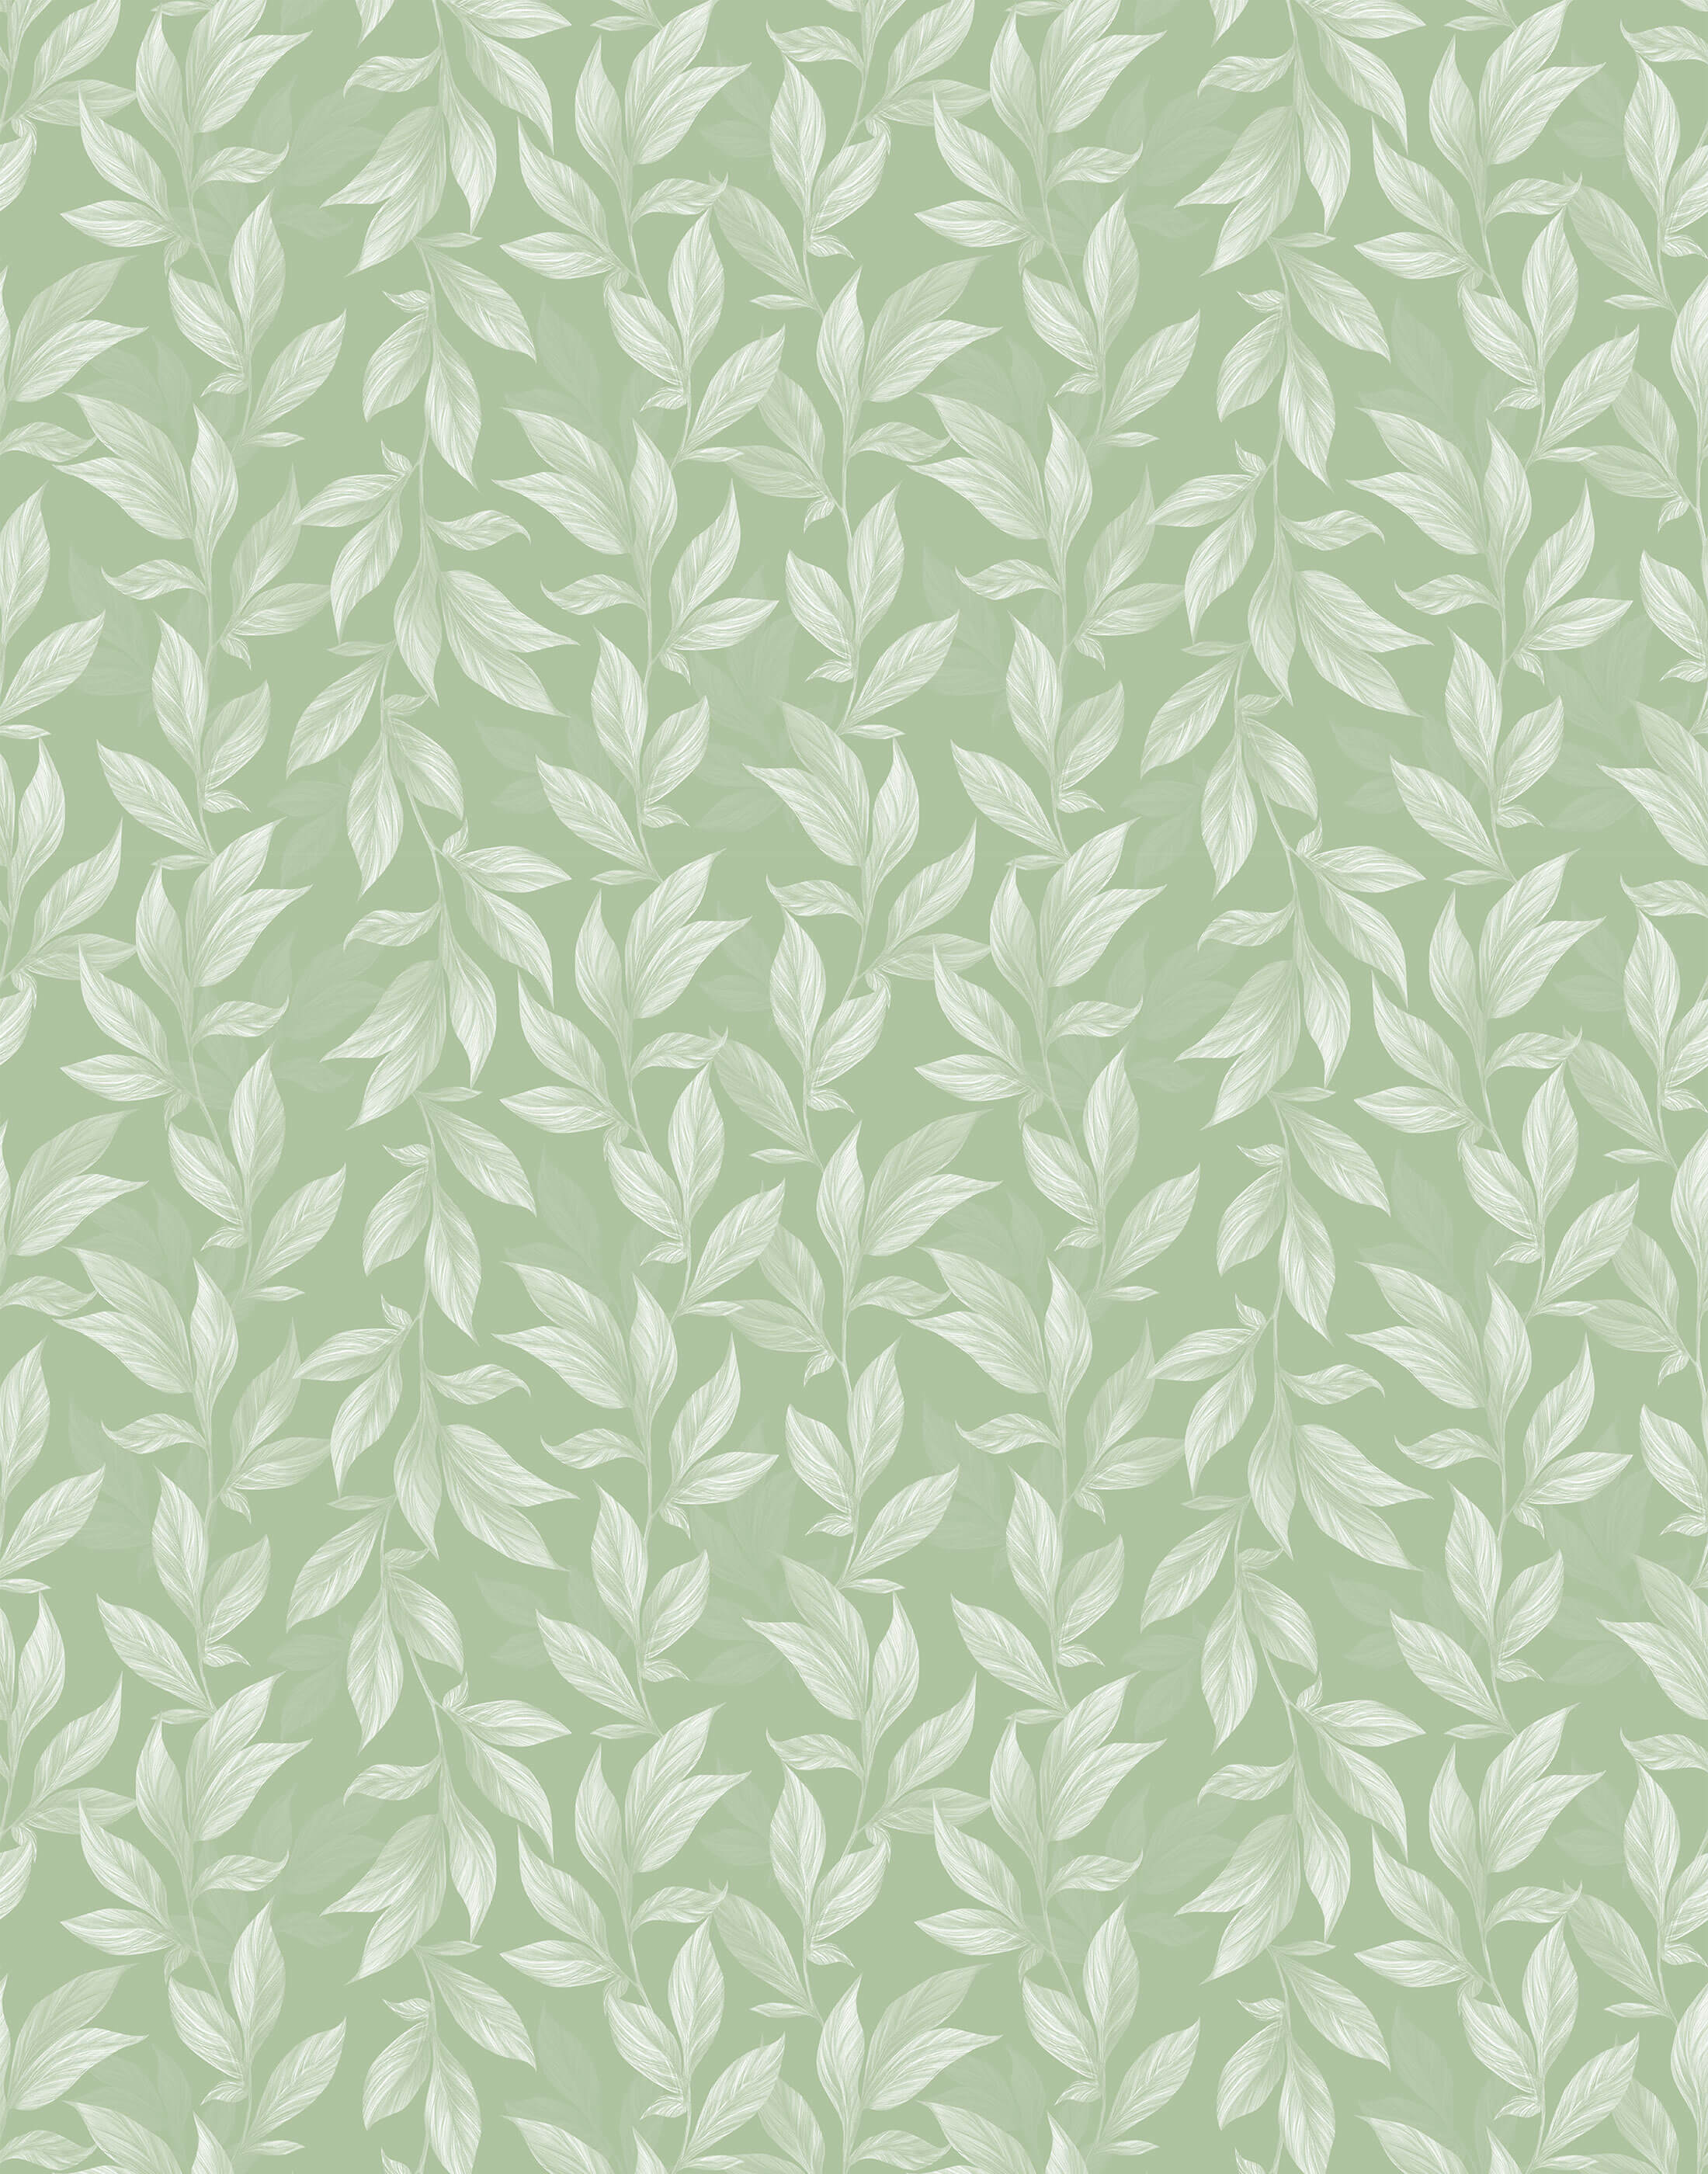 Trendy sage green wallpaper with large floral pattern